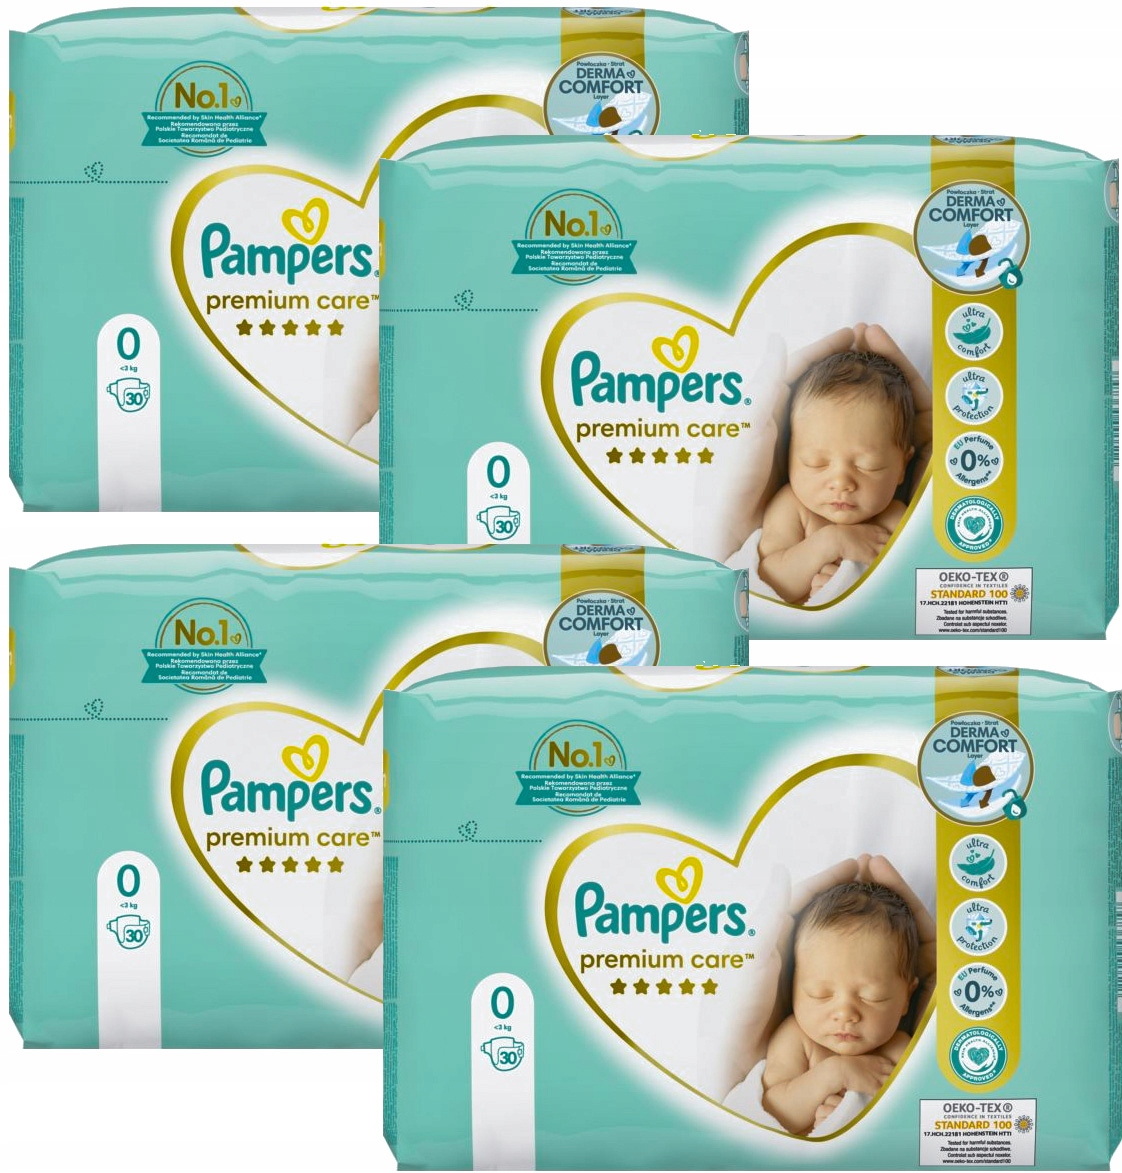 brother dcp-t500 w pampers